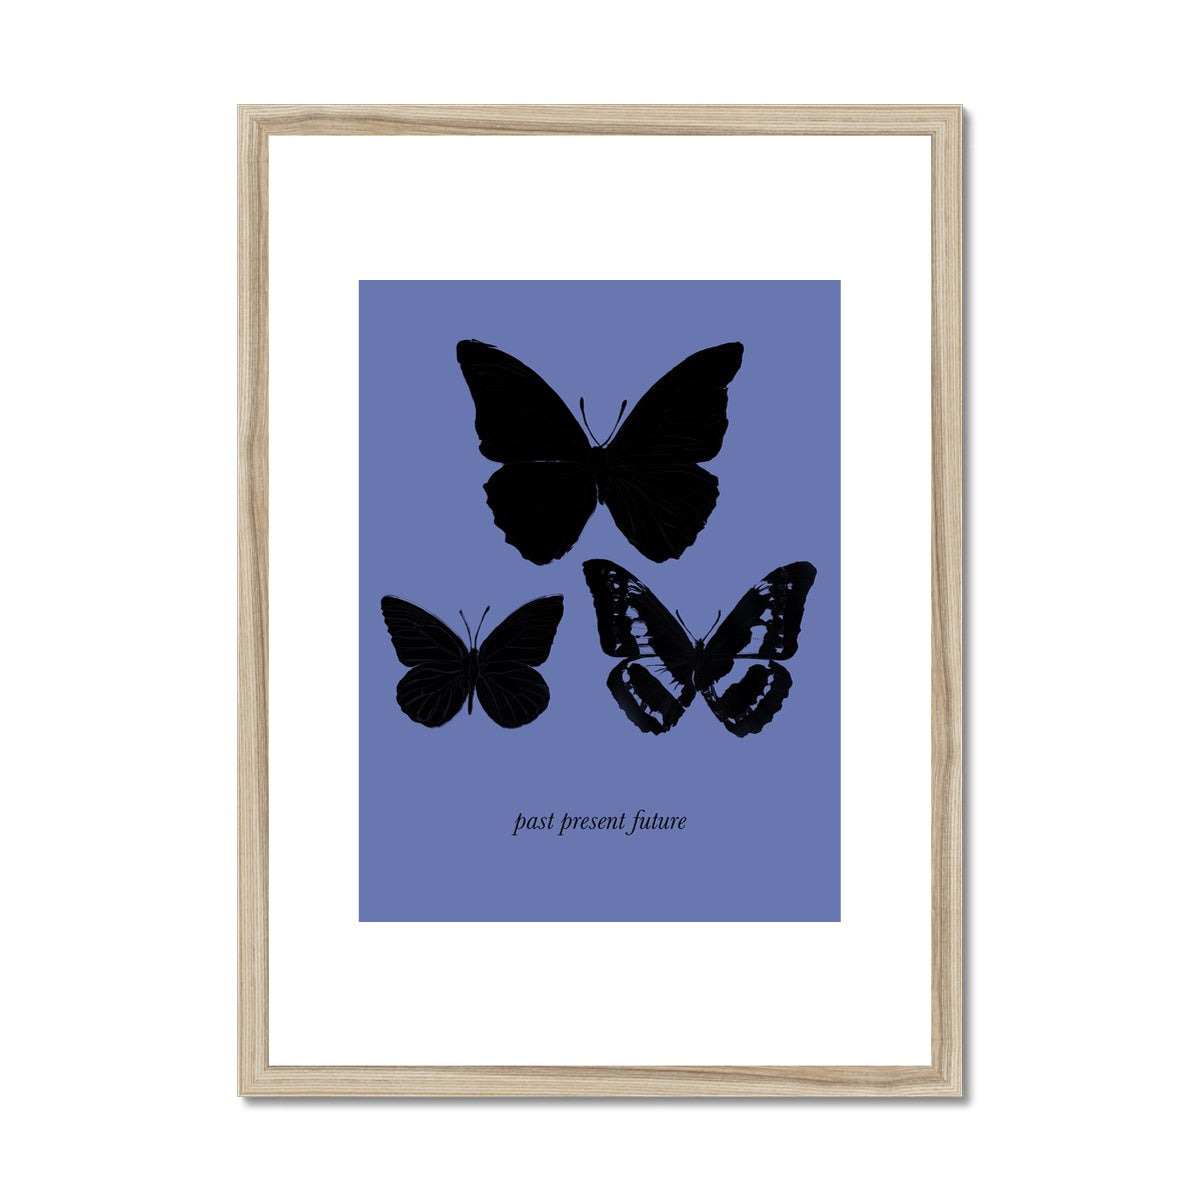 The Butterfly Effect / Past Present Future Framed & Mounted Print